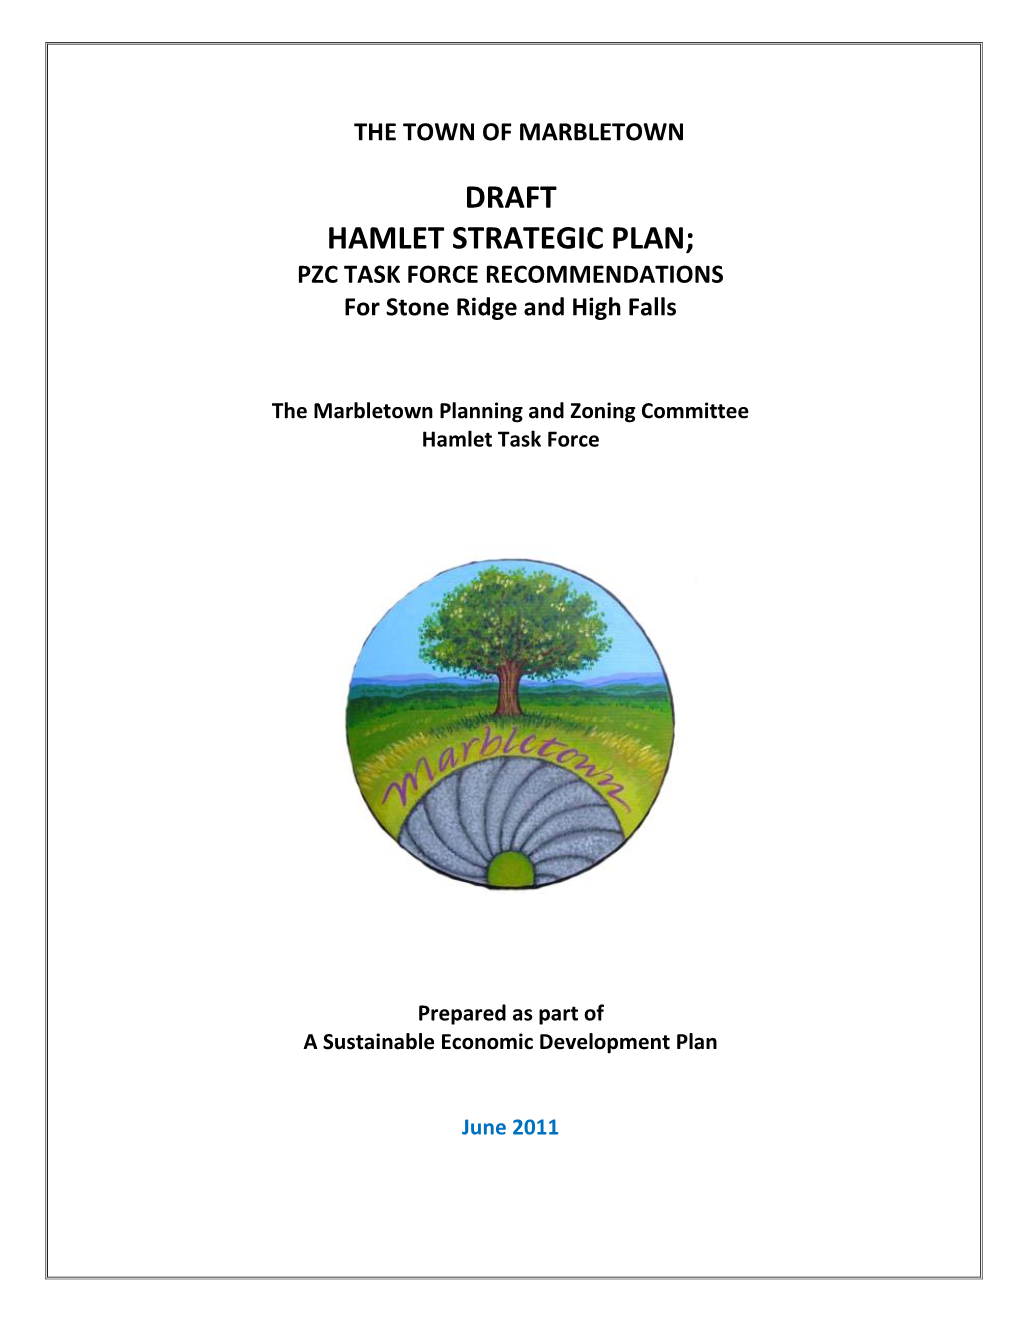 HAMLET STRATEGIC PLAN; PZC TASK FORCE RECOMMENDATIONS for Stone Ridge and High Falls